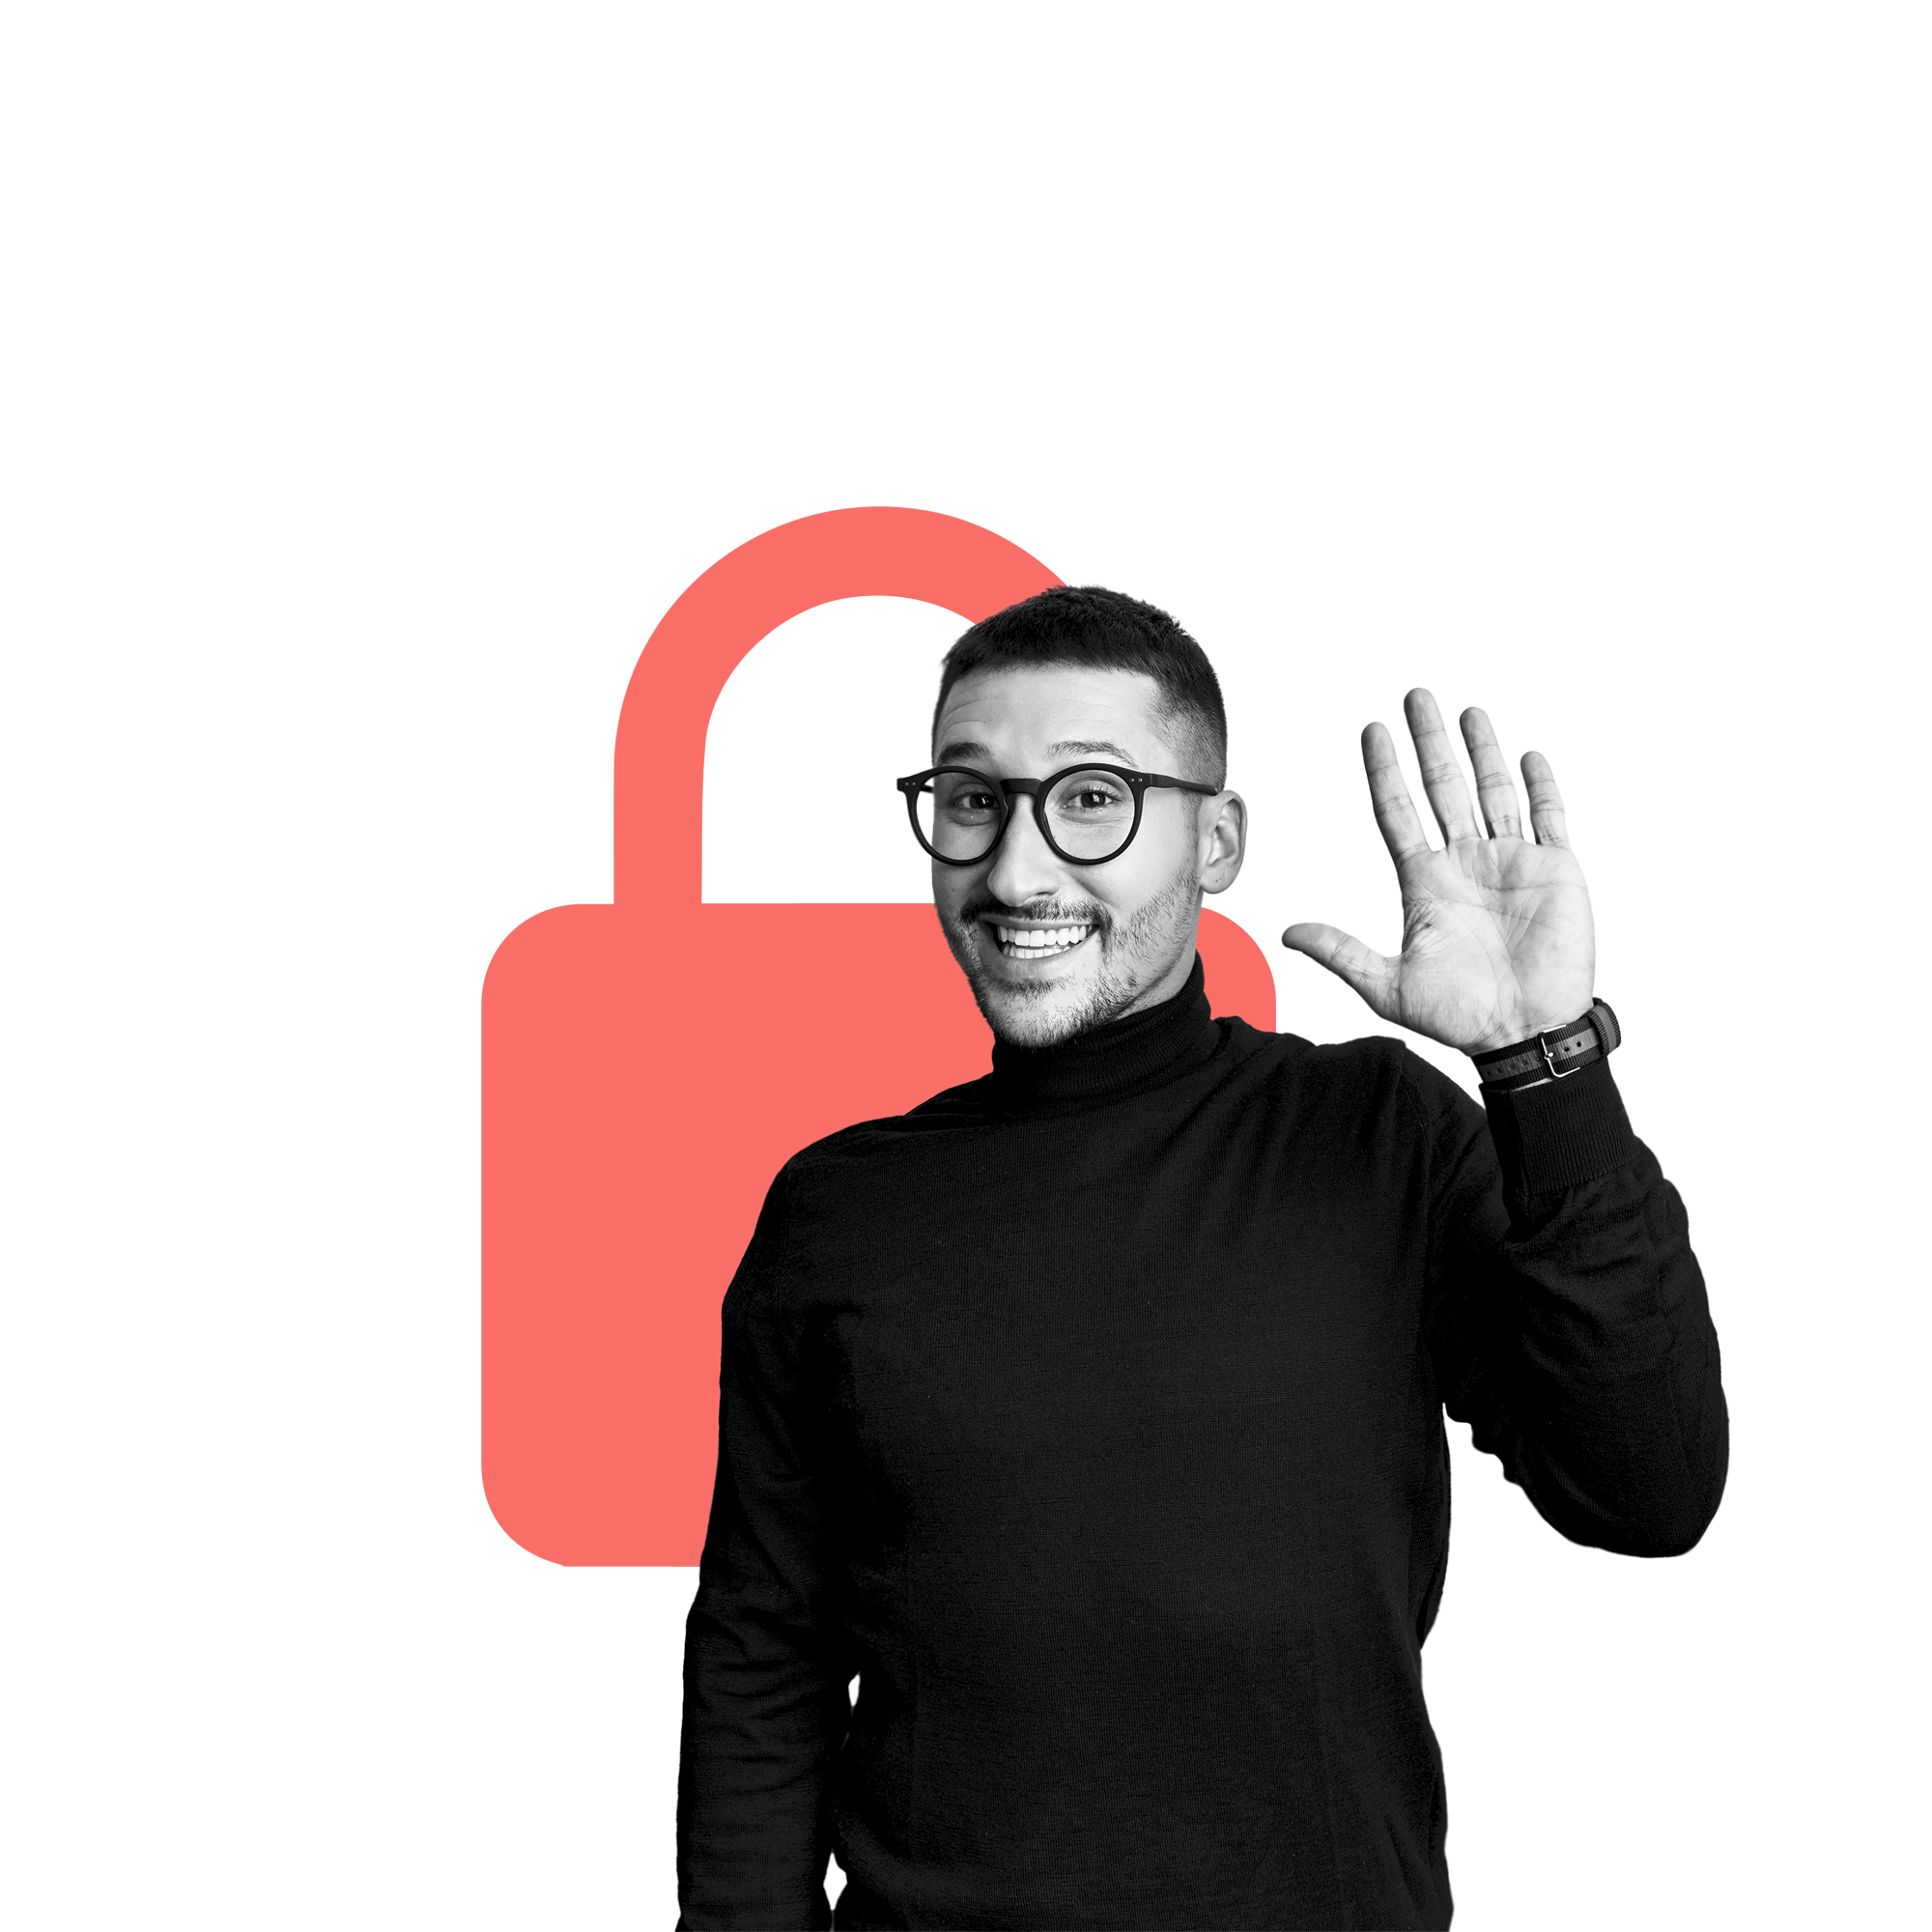 Man waving in front of an encryption and web security icon